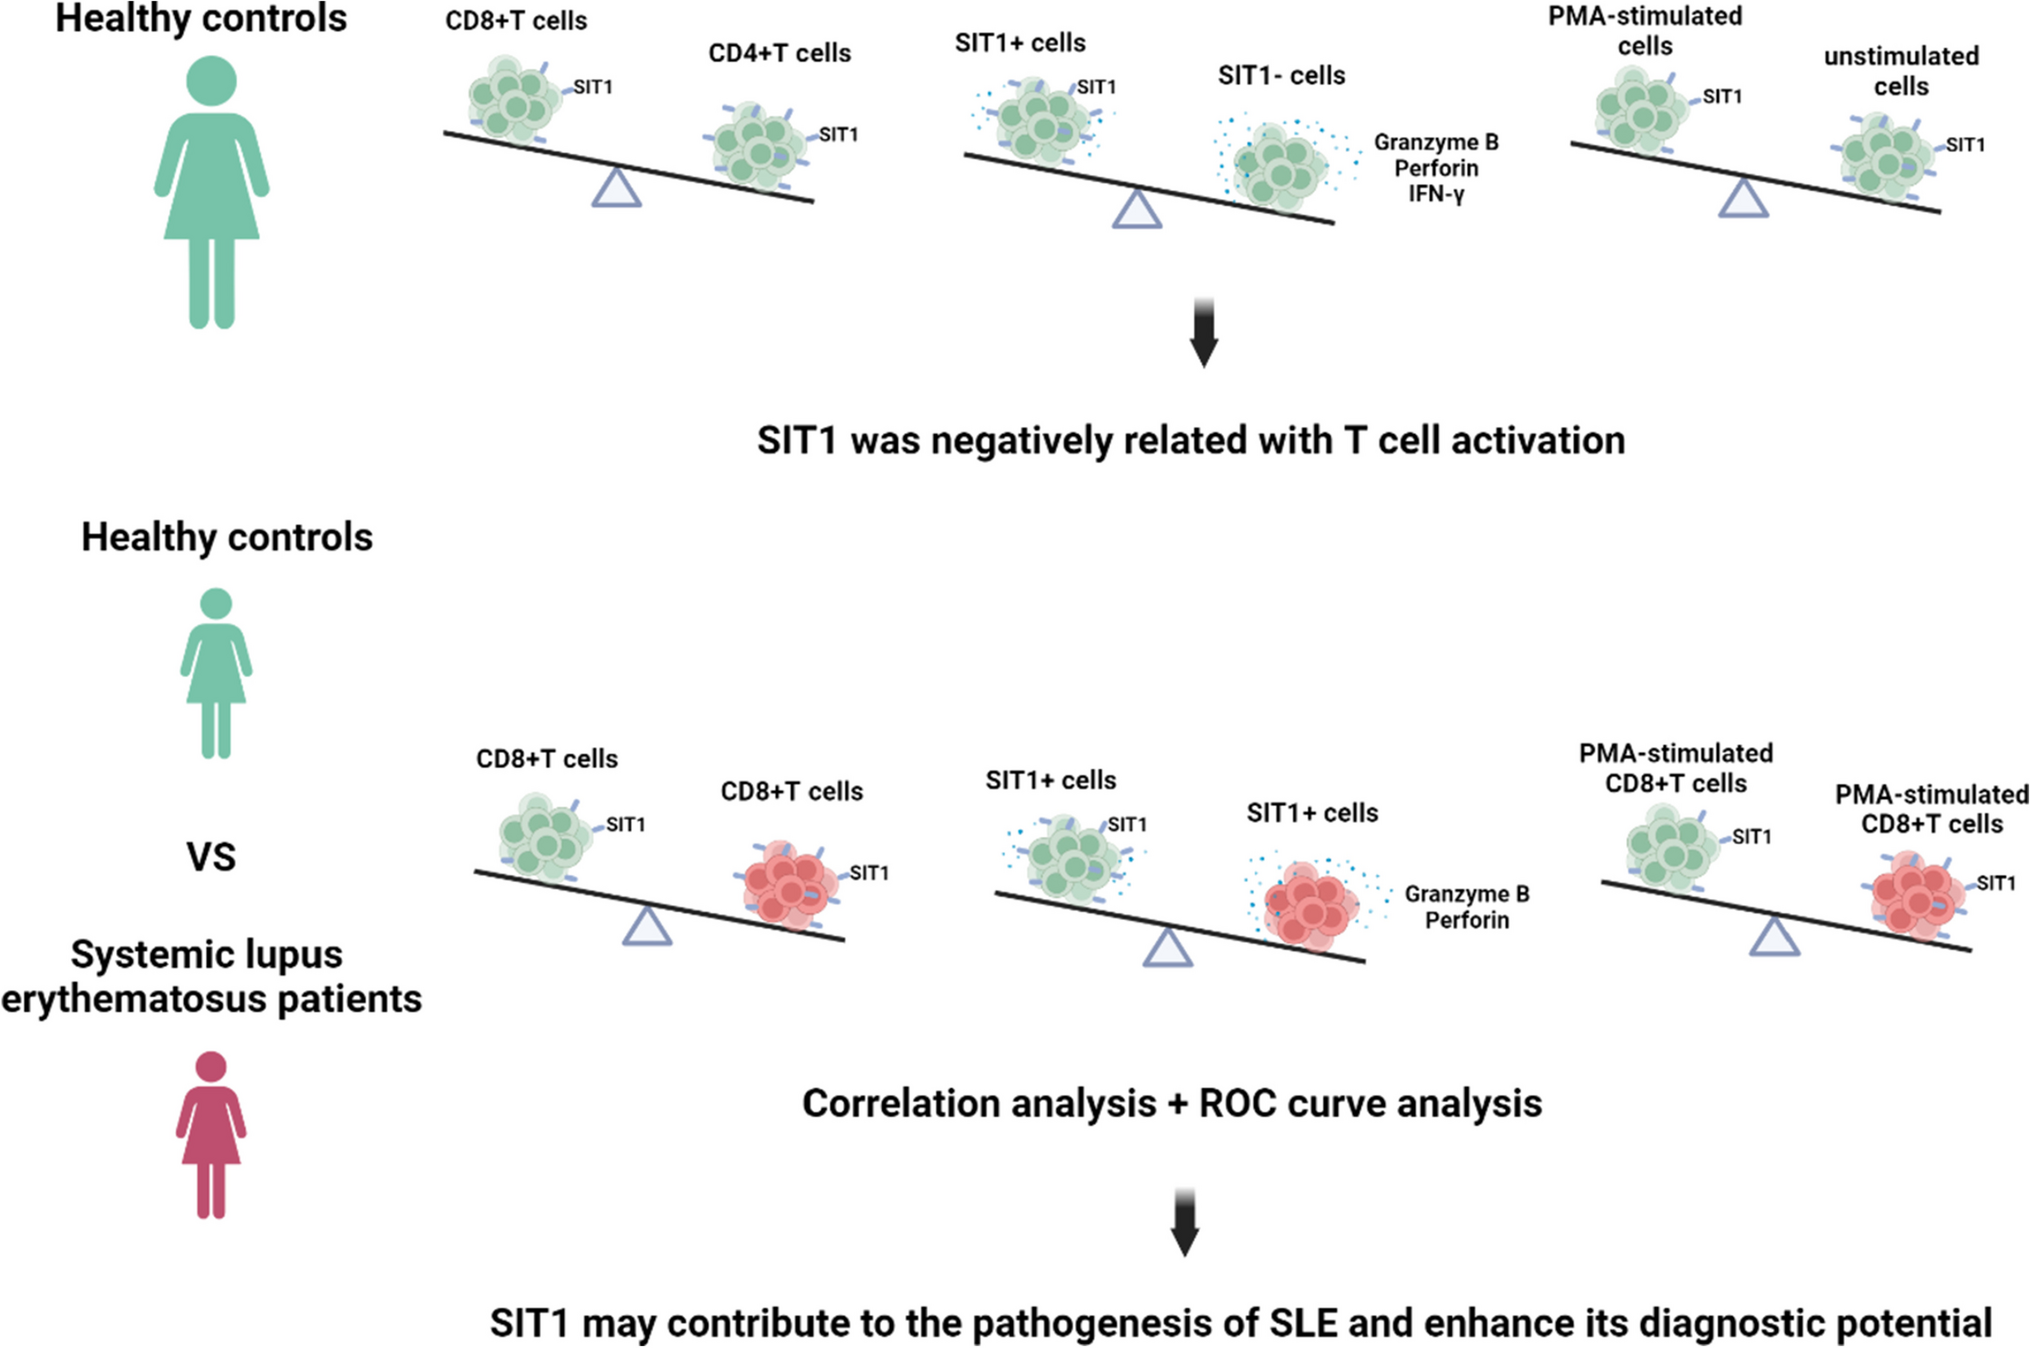 SIT1 identifies circulating hypoactive T cells with elevated cytotoxic molecule secretion in systemic lupus erythematosus patients